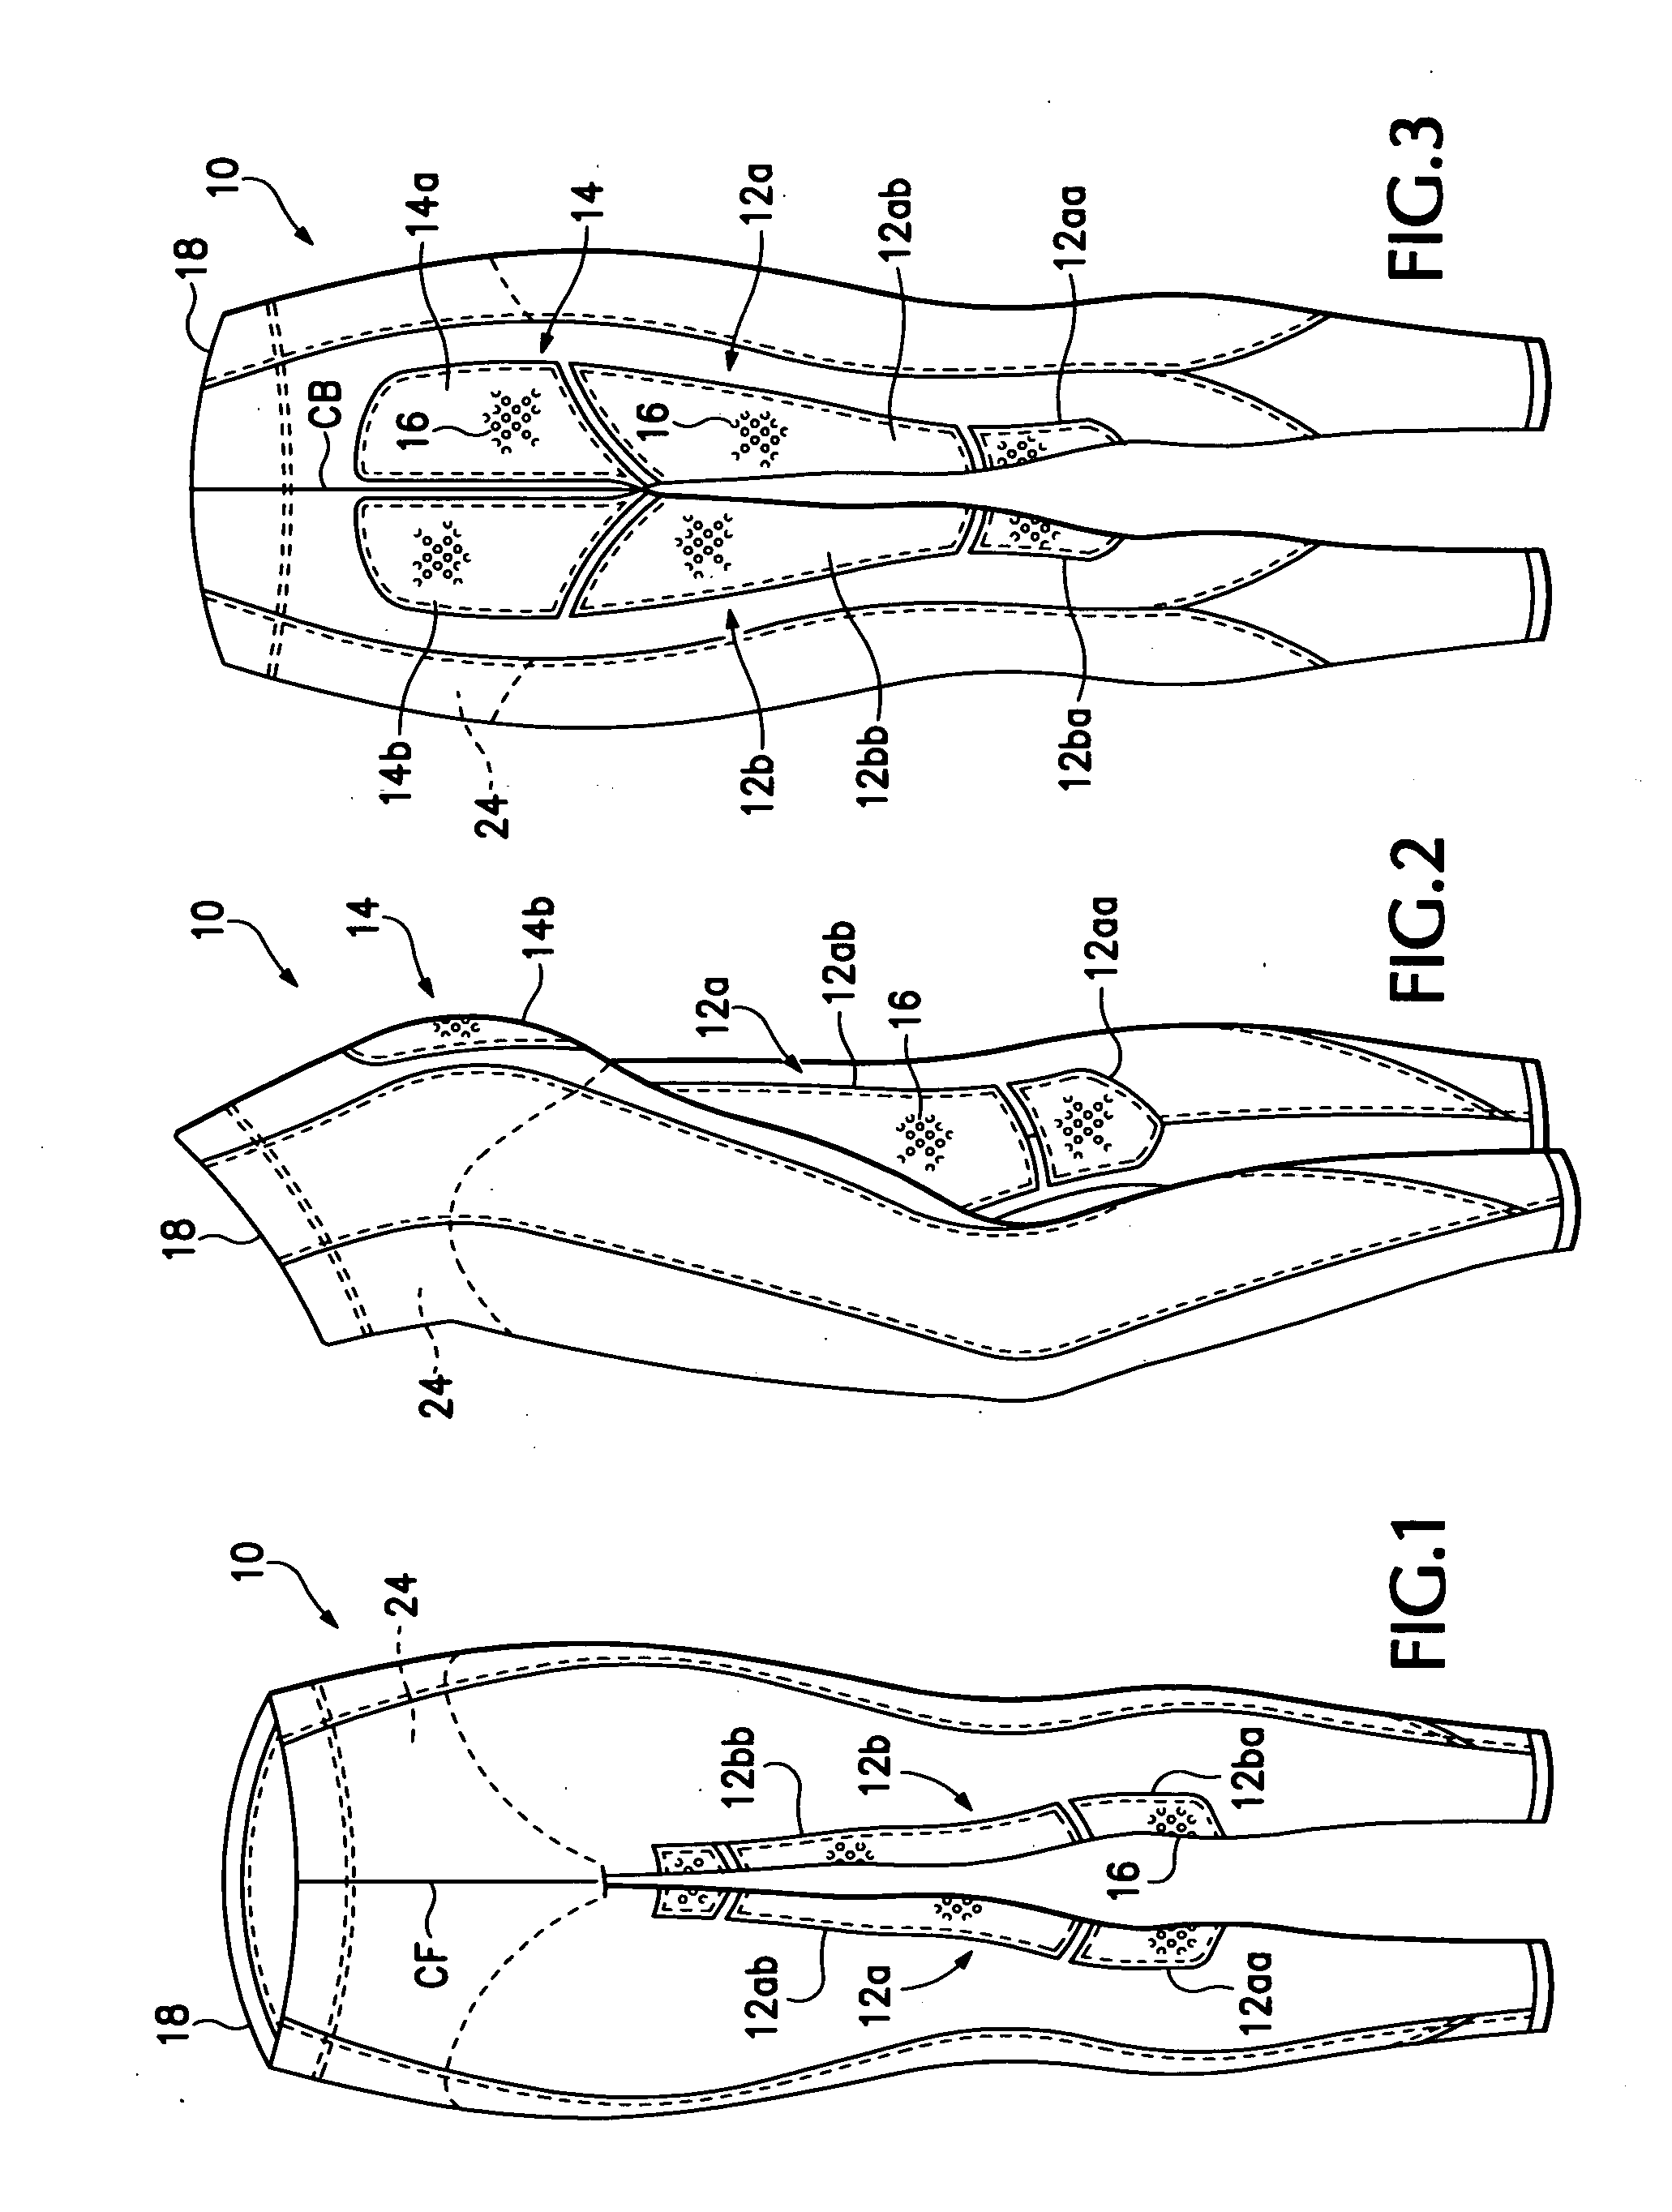 Equestrian riding breeches garment and method for its manufacture